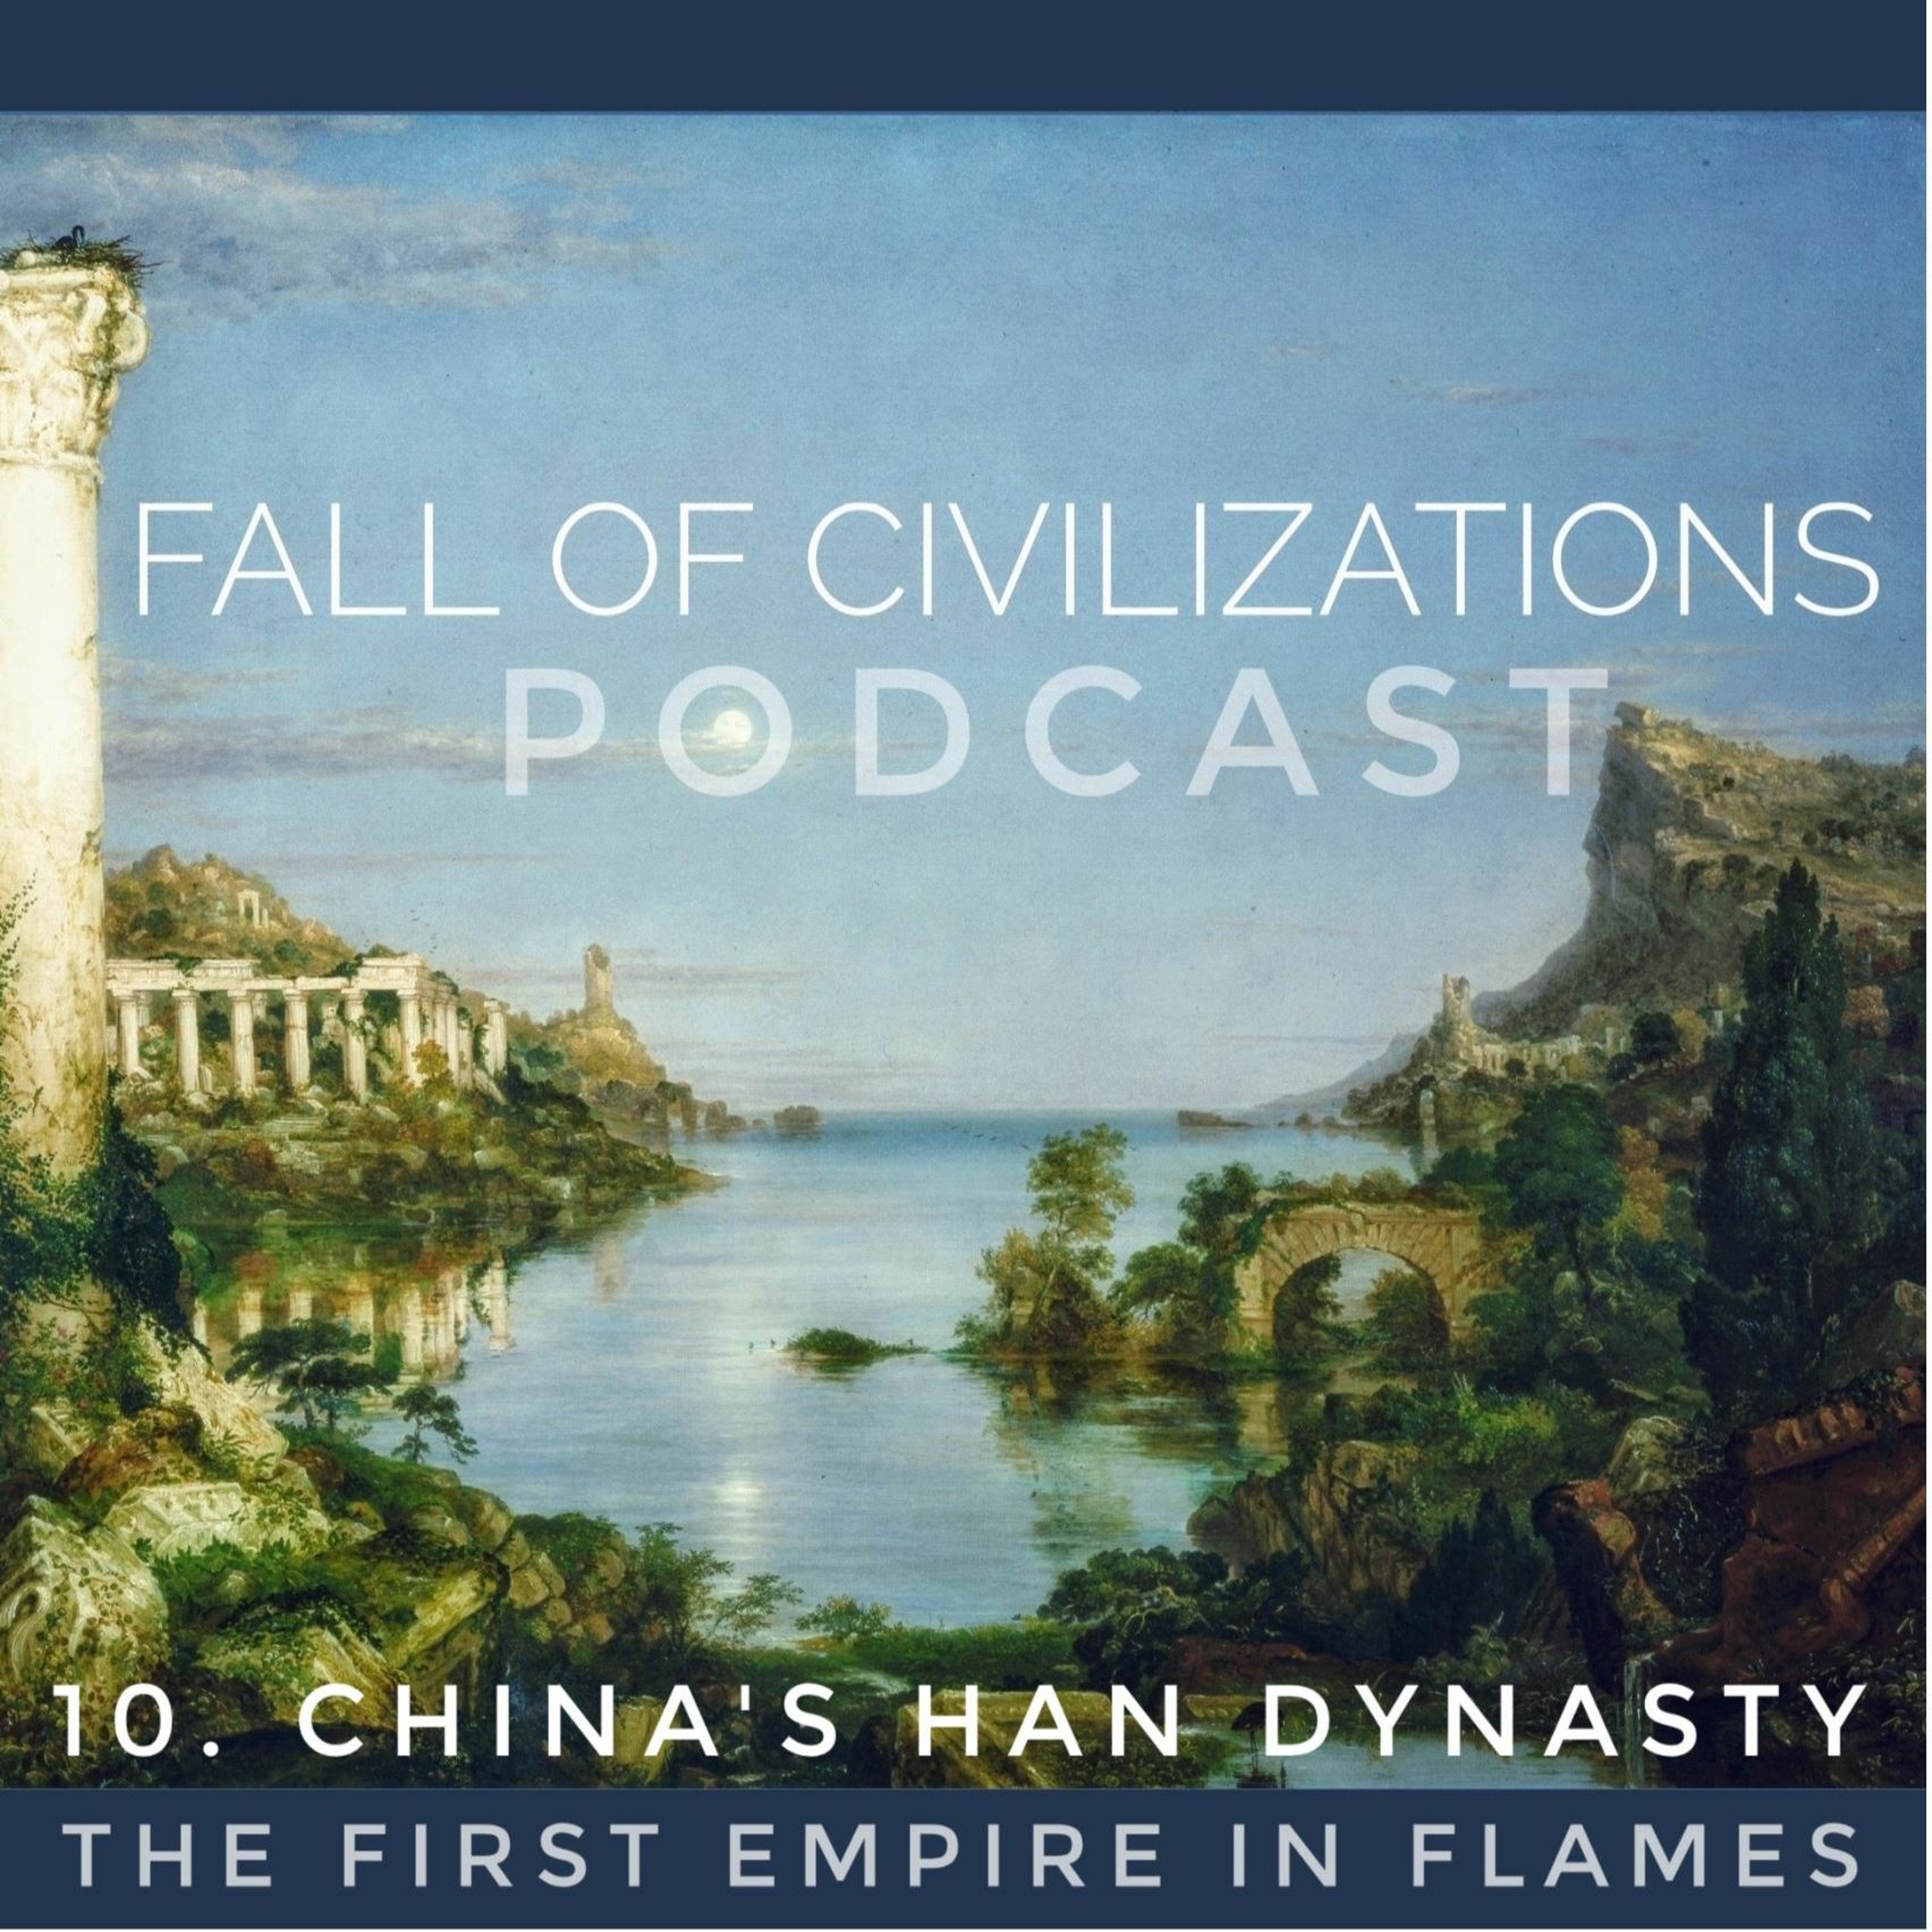 10. China’s Han Dynasty - The First Empire in Flames